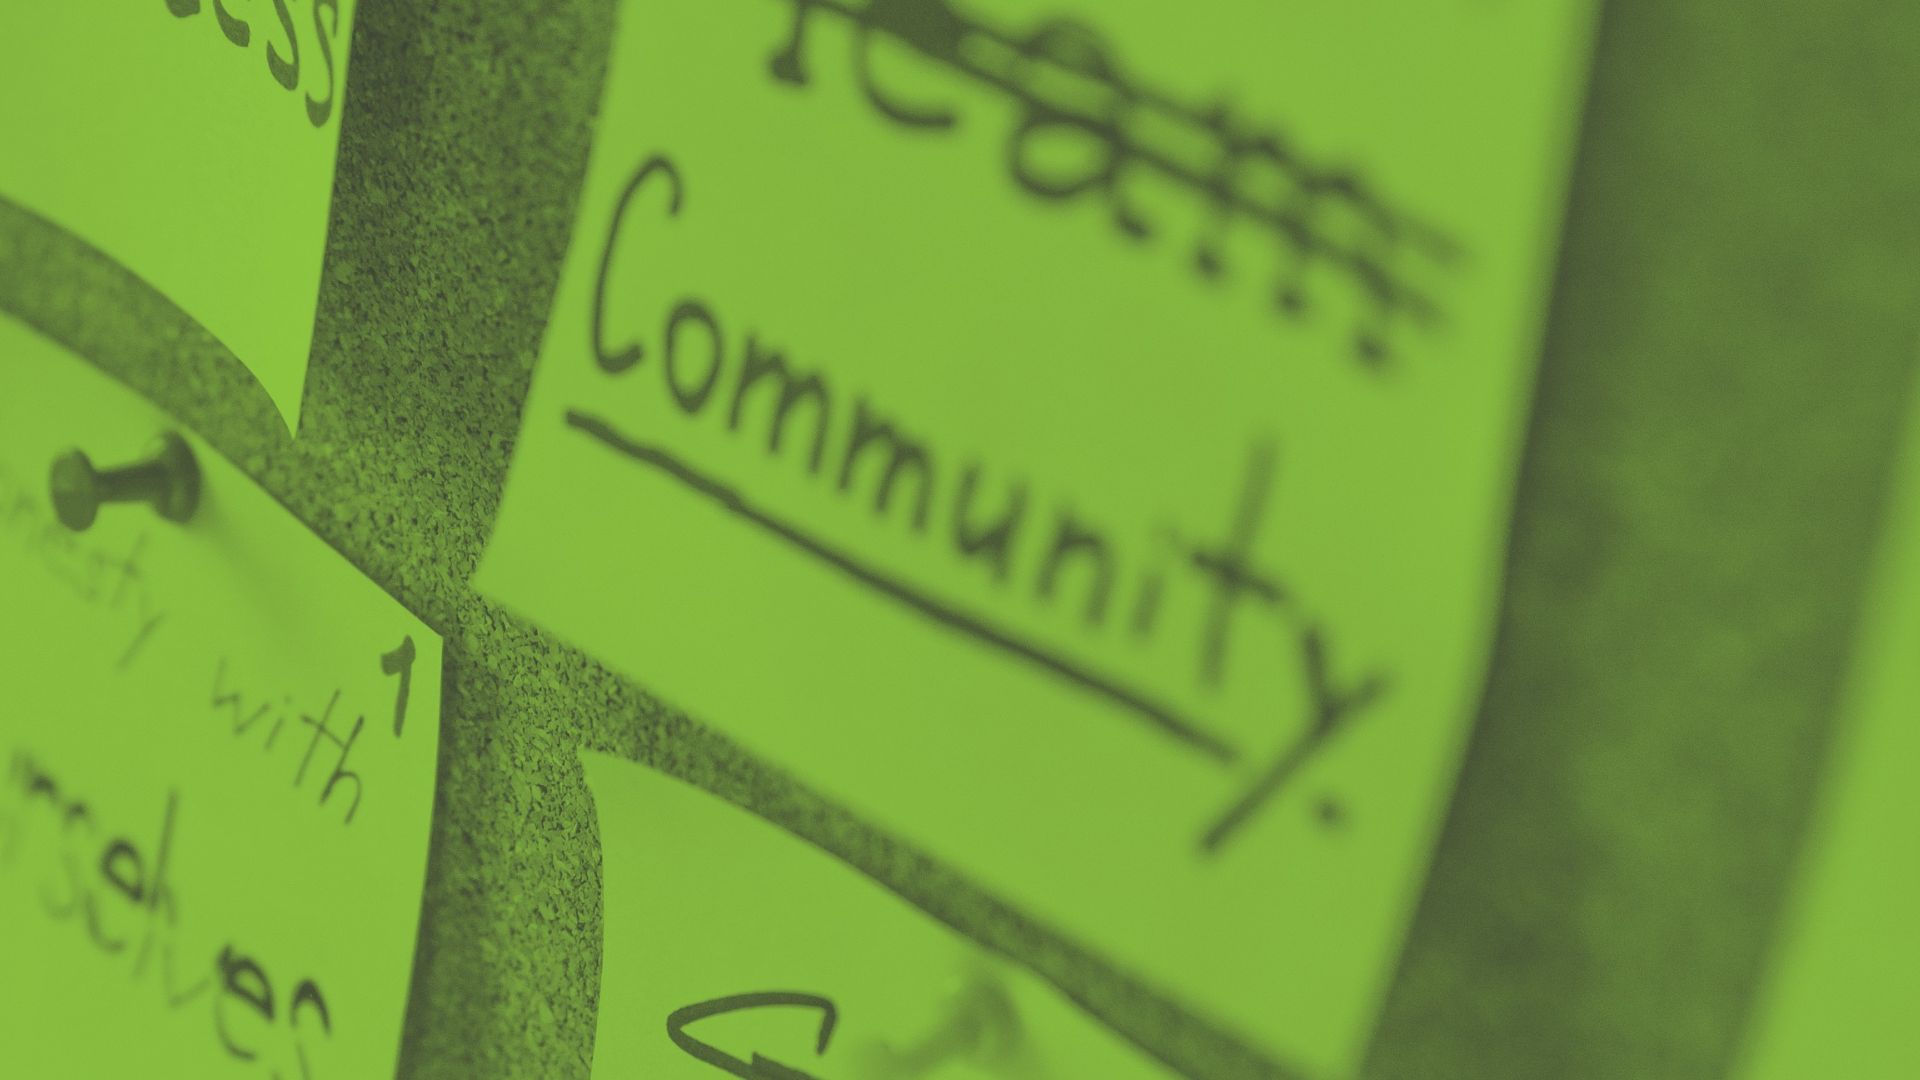 Image of a pinboard with the word community on it - Ford Britain Trust local community grants